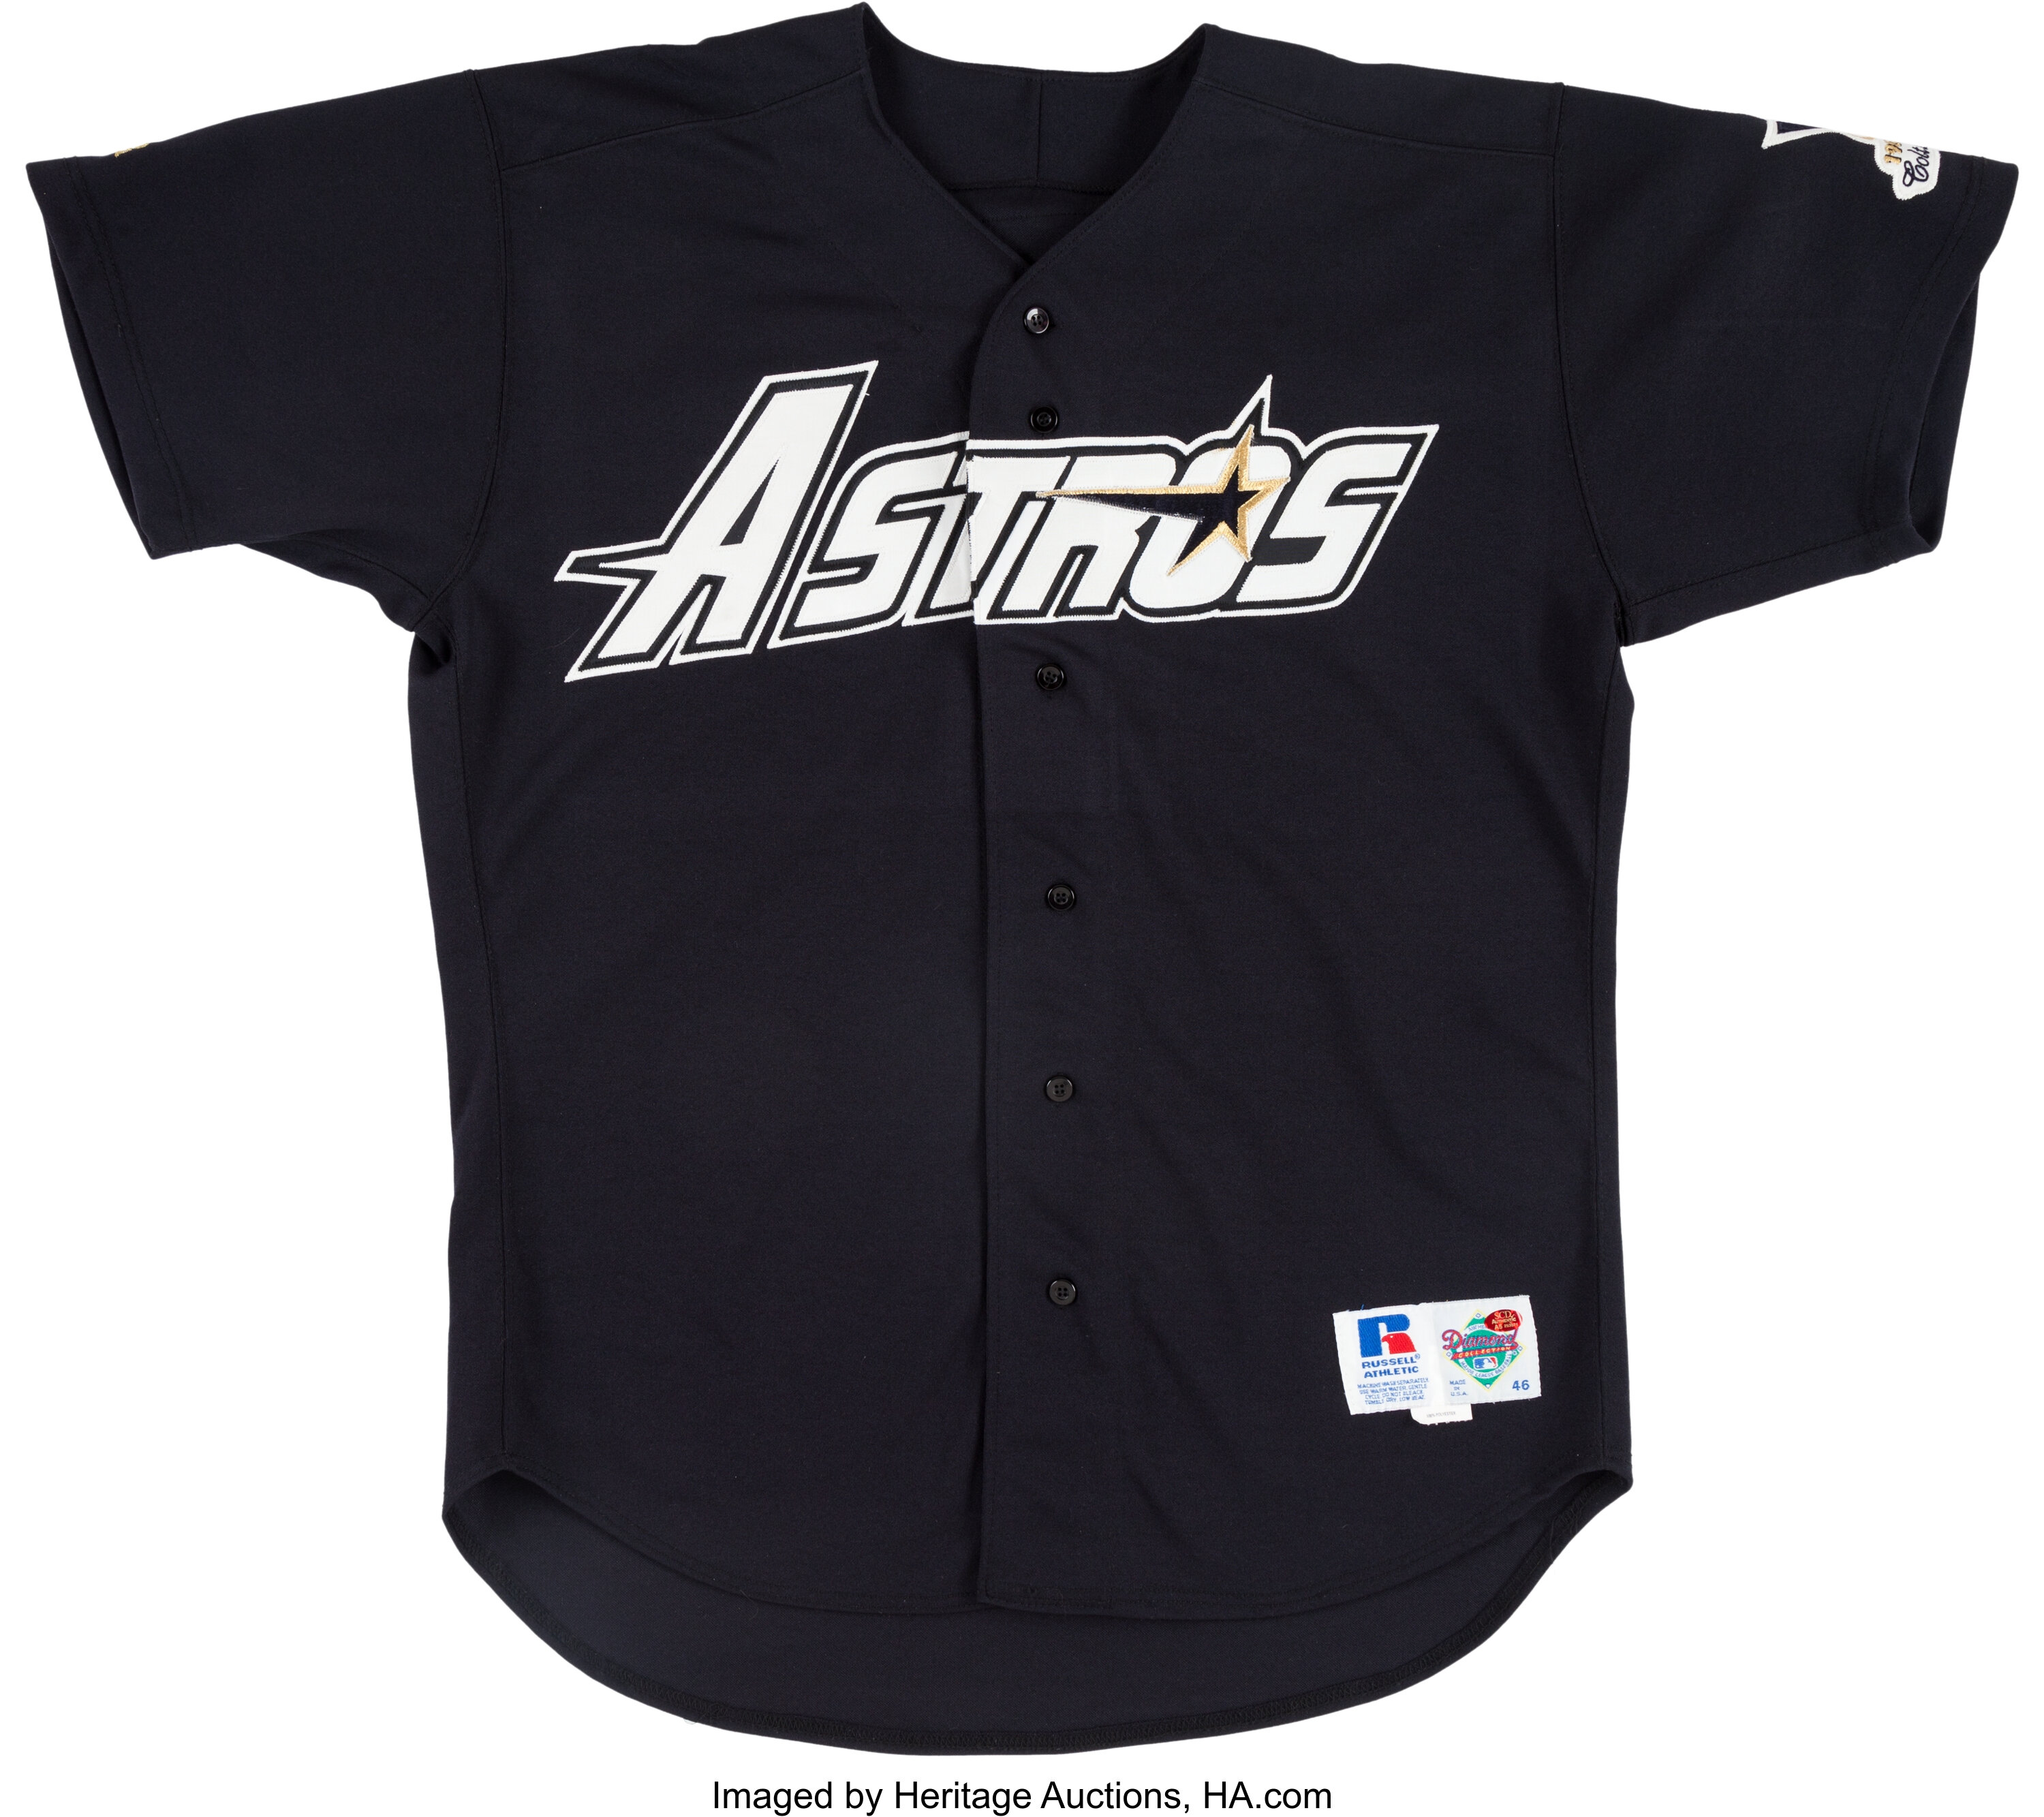 1994-96 Houston Astros Blank # Game Issued Black Jersey Batting